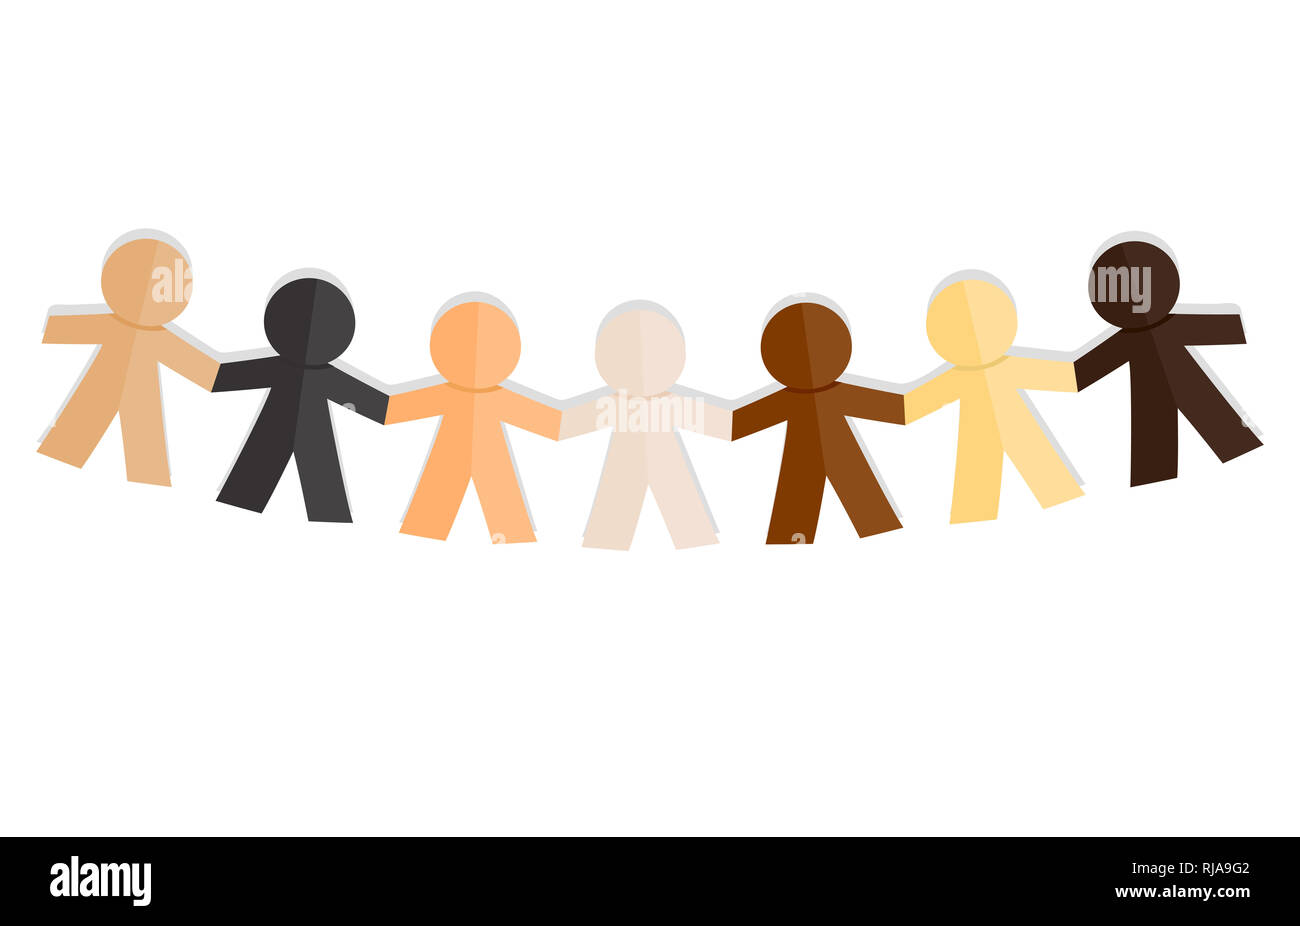 Illustration of Paper Cutout Dolls in Different Colors. Diversity Unity Concept Stock Photo